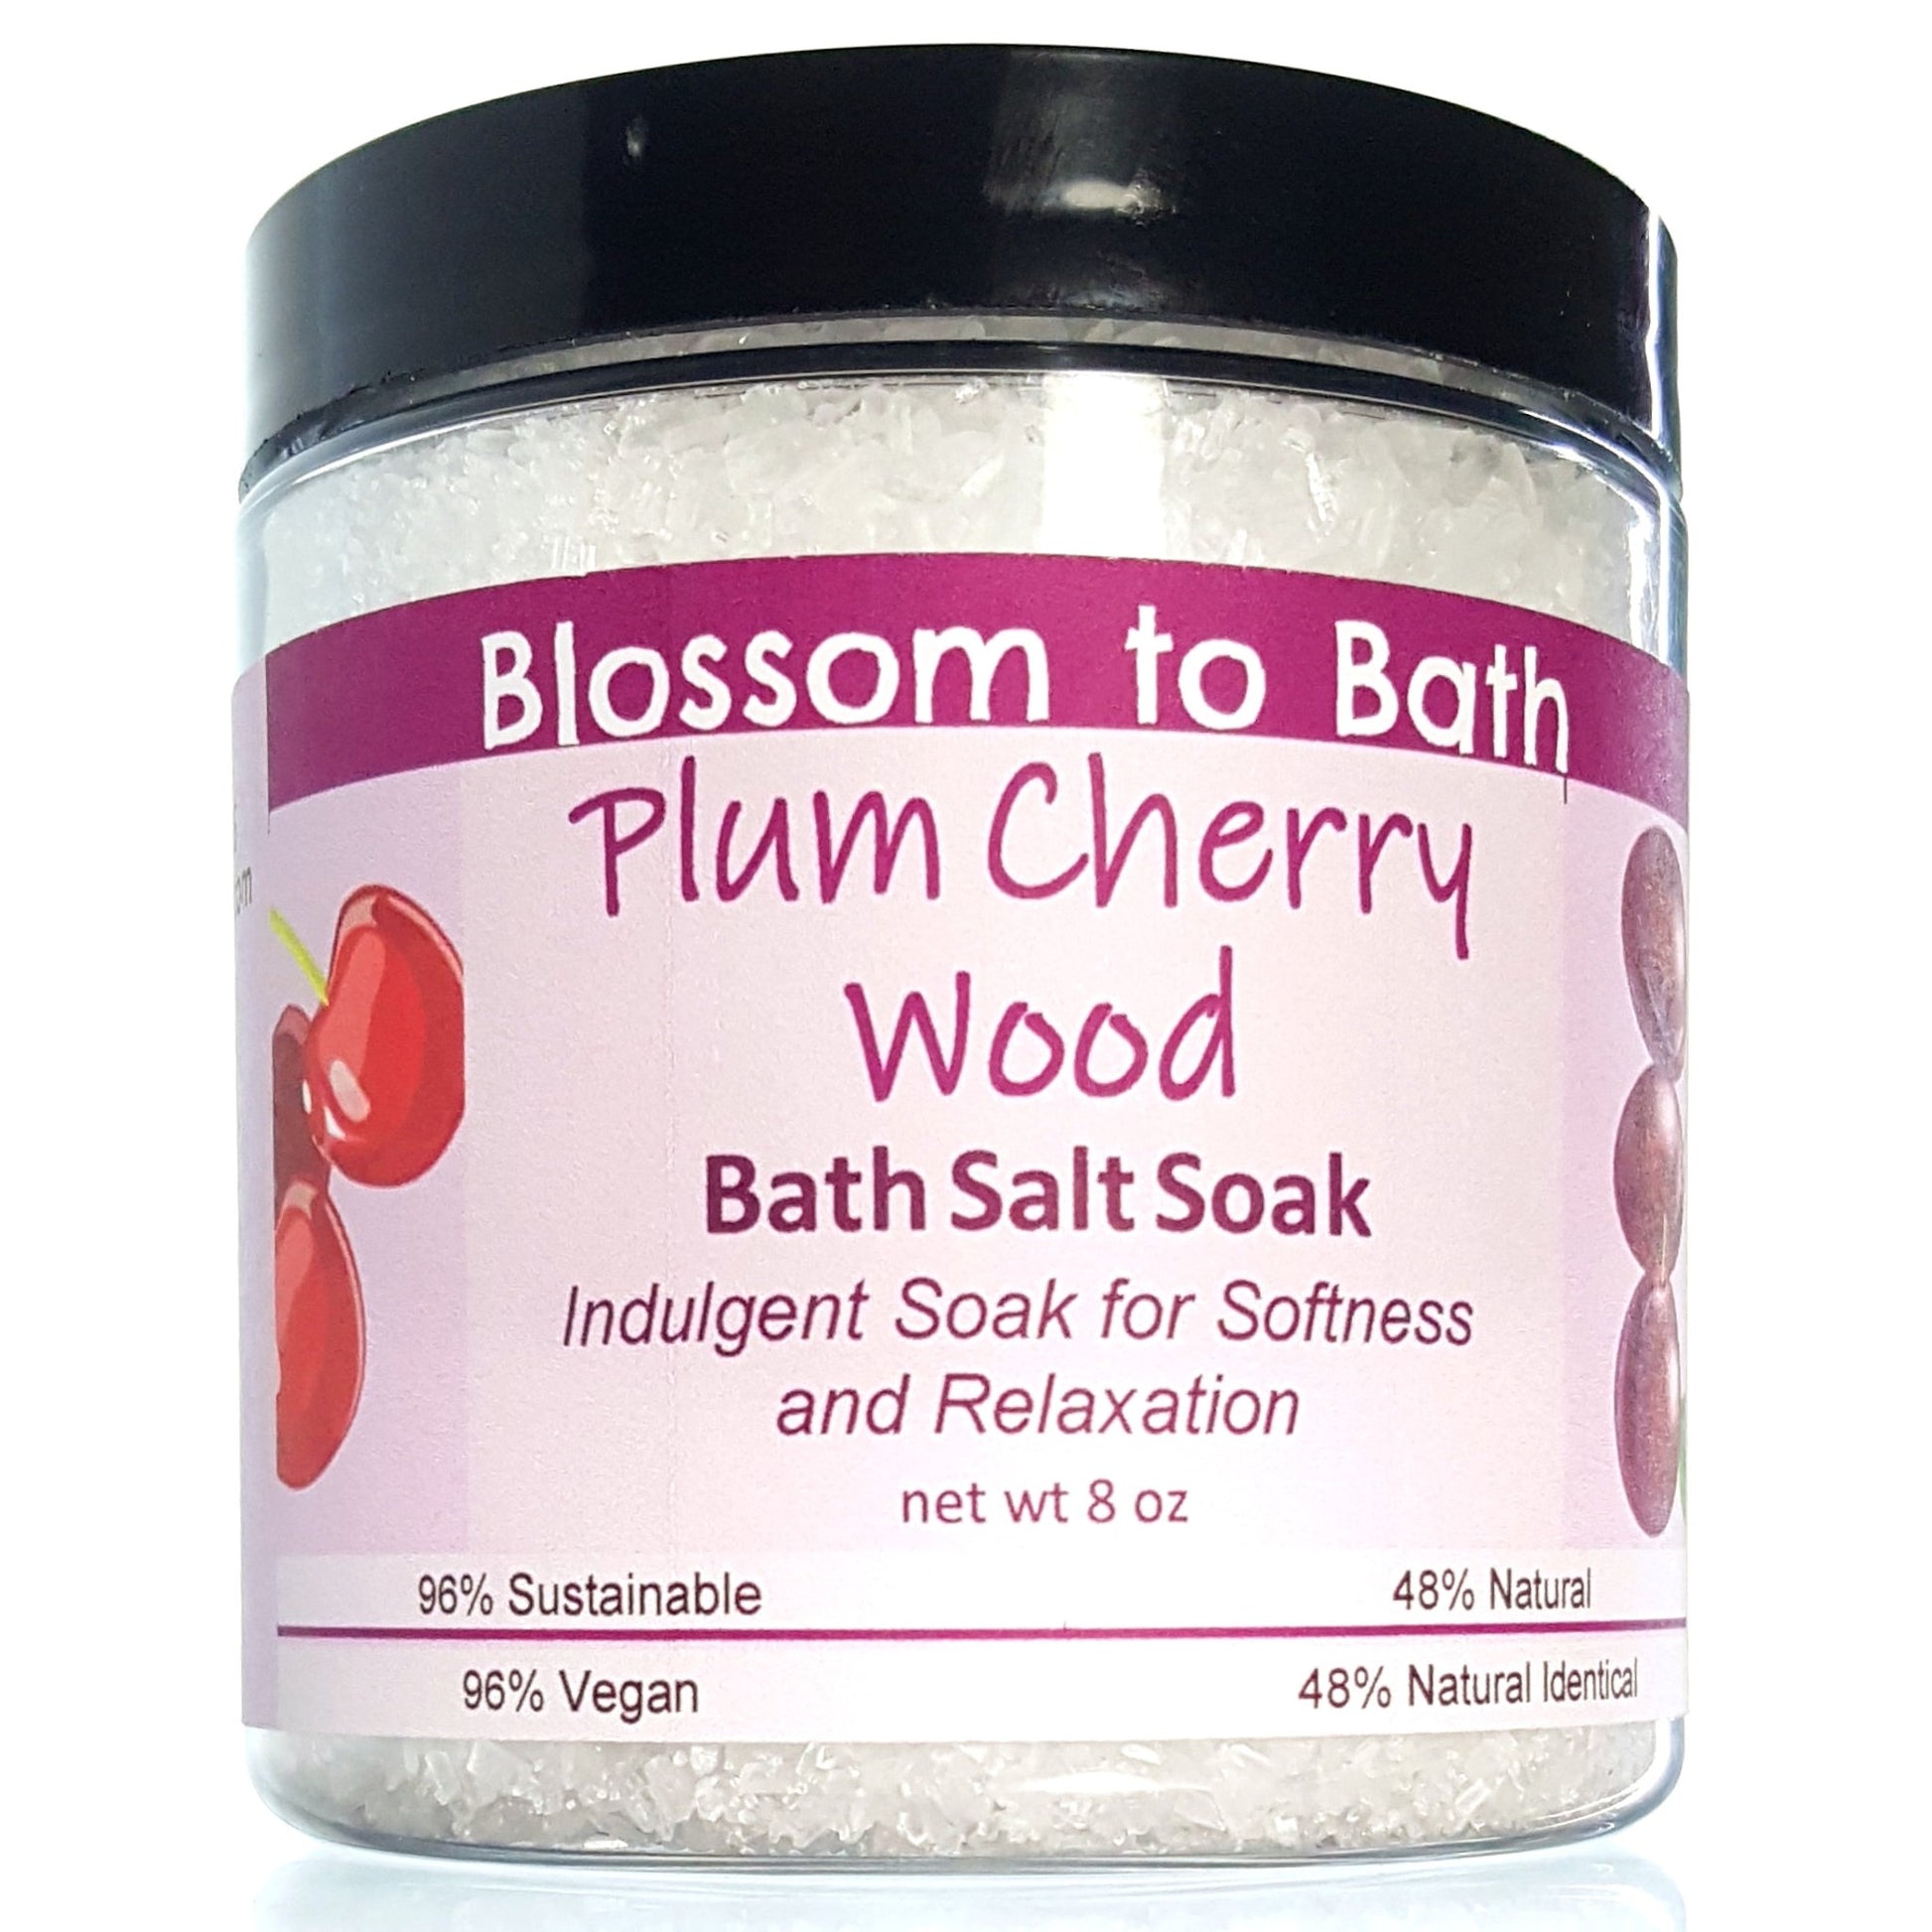 Buy Blossom to Bath Plum Cherry Wood Bath Salt Soak from Flowersong Soap Studio.  Scented epsom salts for a luxurious soaking experience  A charmingly sweet and woodsy fragrance.